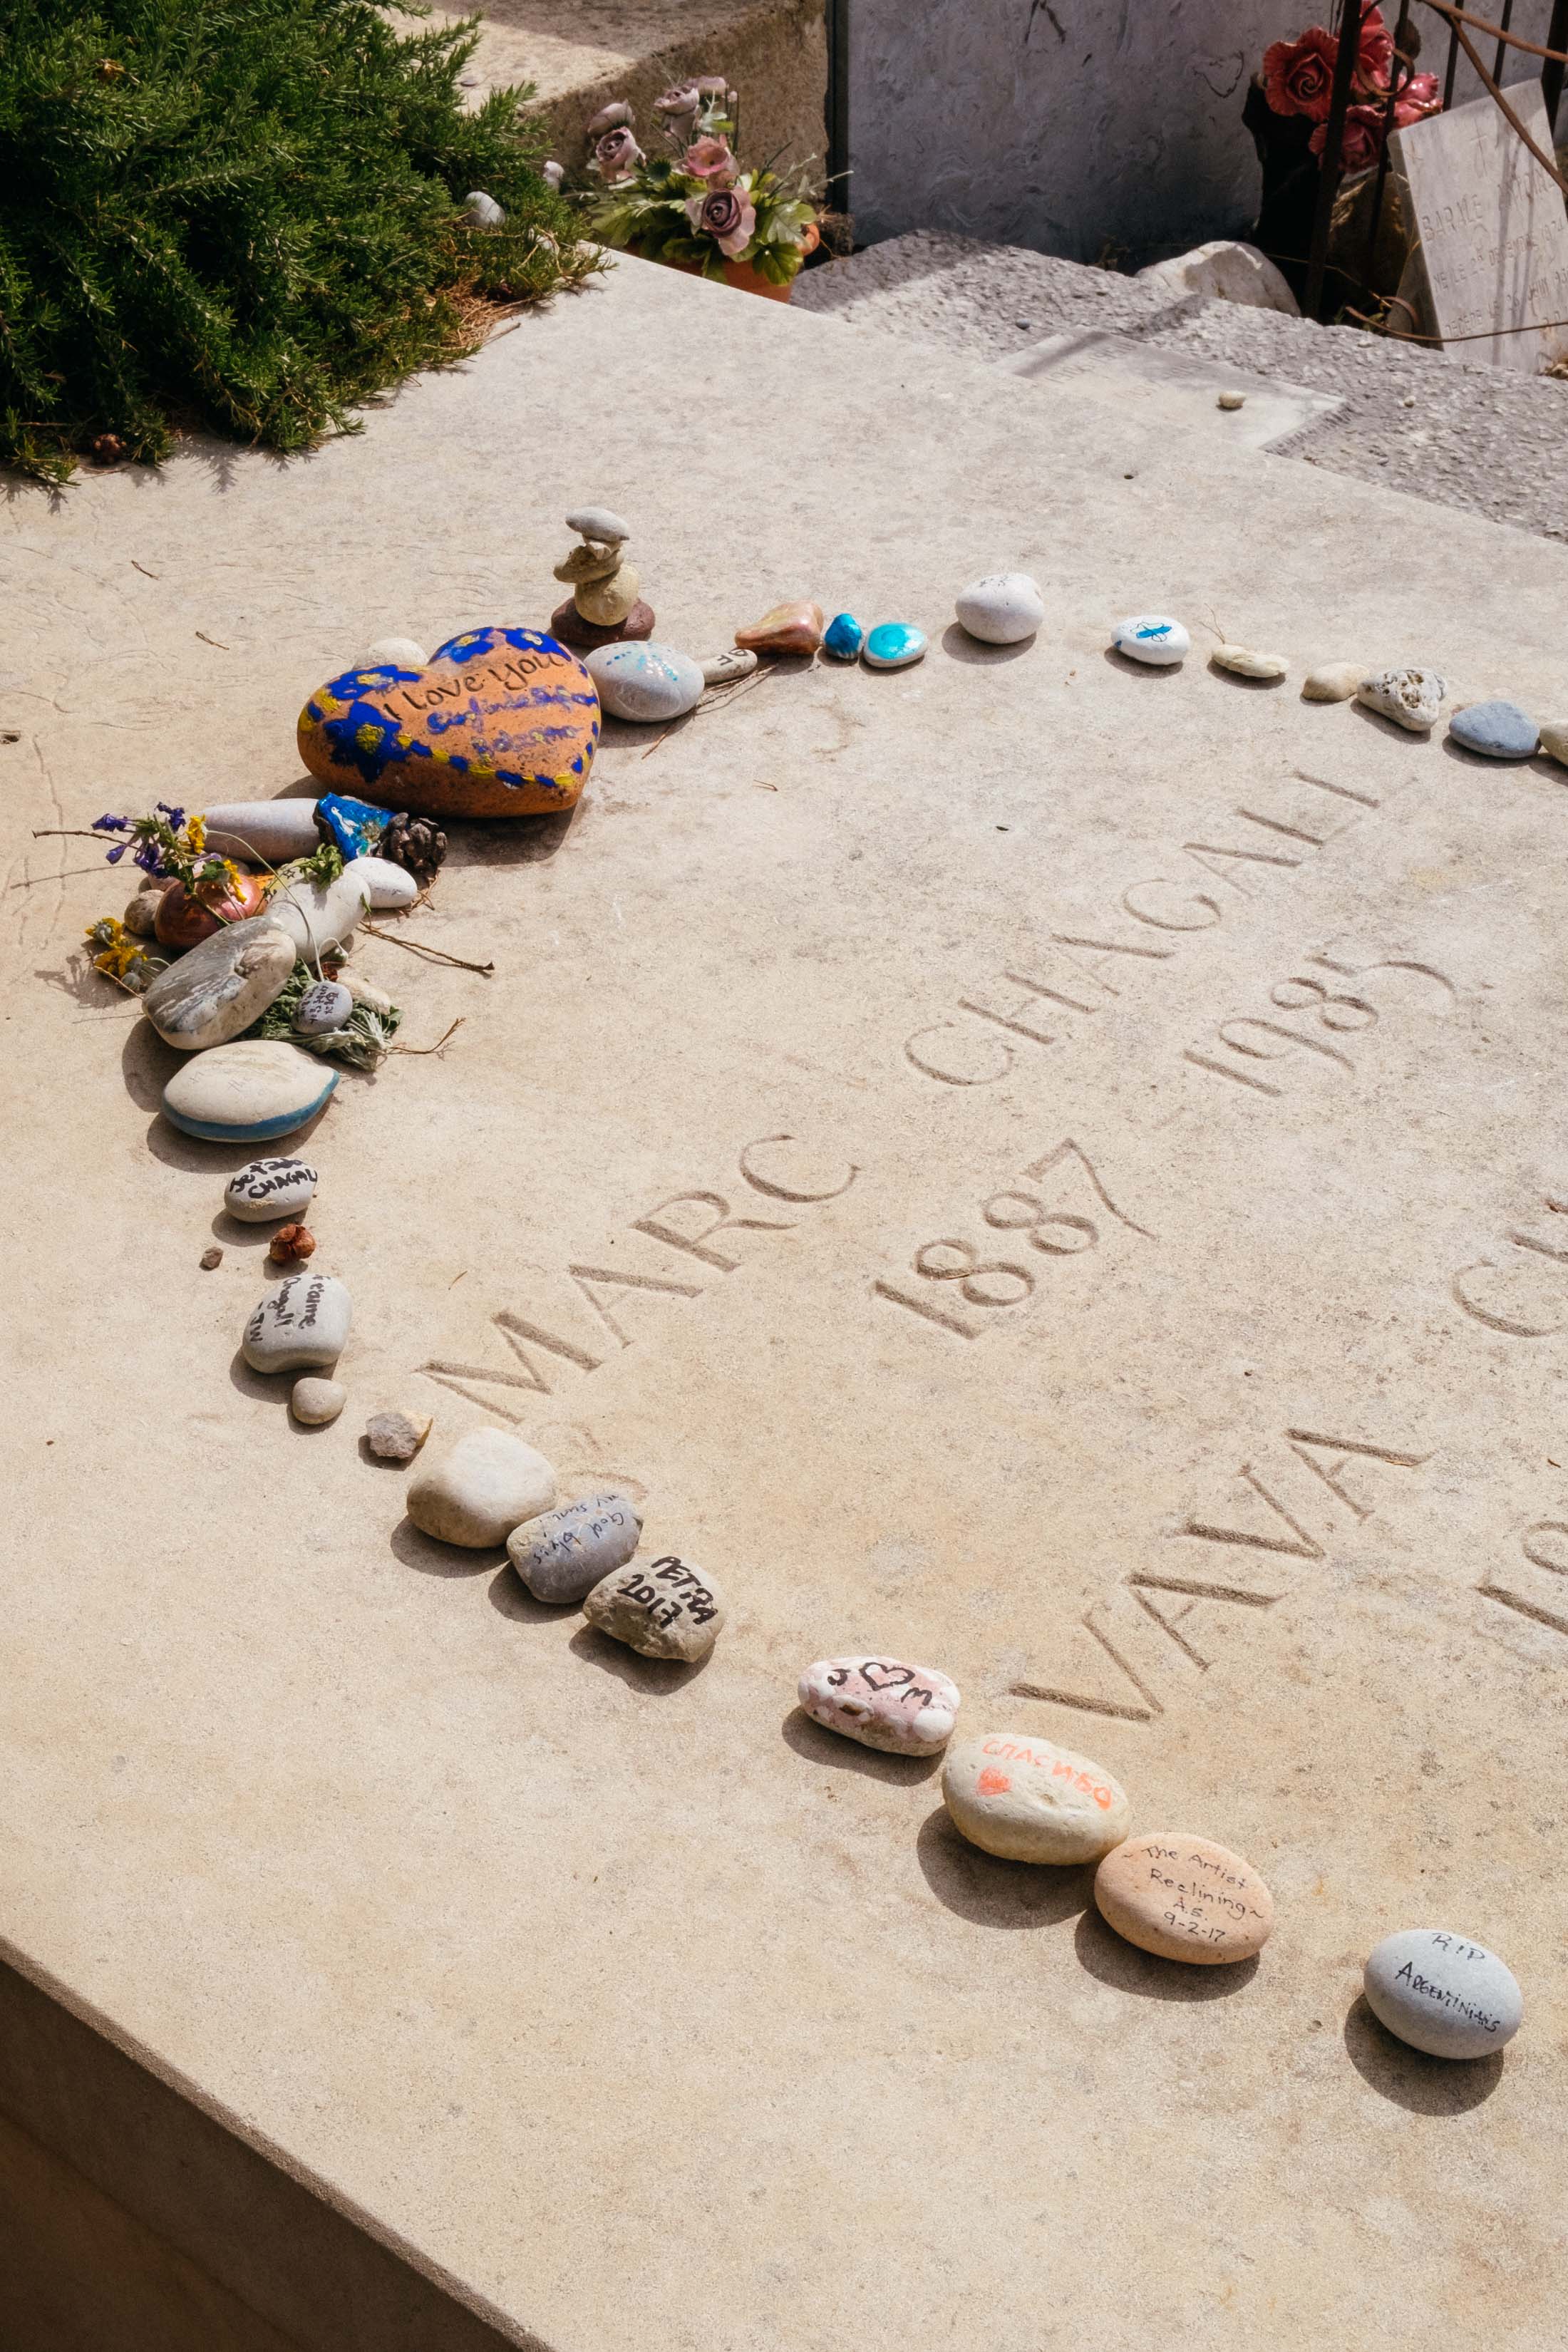 Marc Chagall's grave at the cemetery in Saint Paul de Vence, France